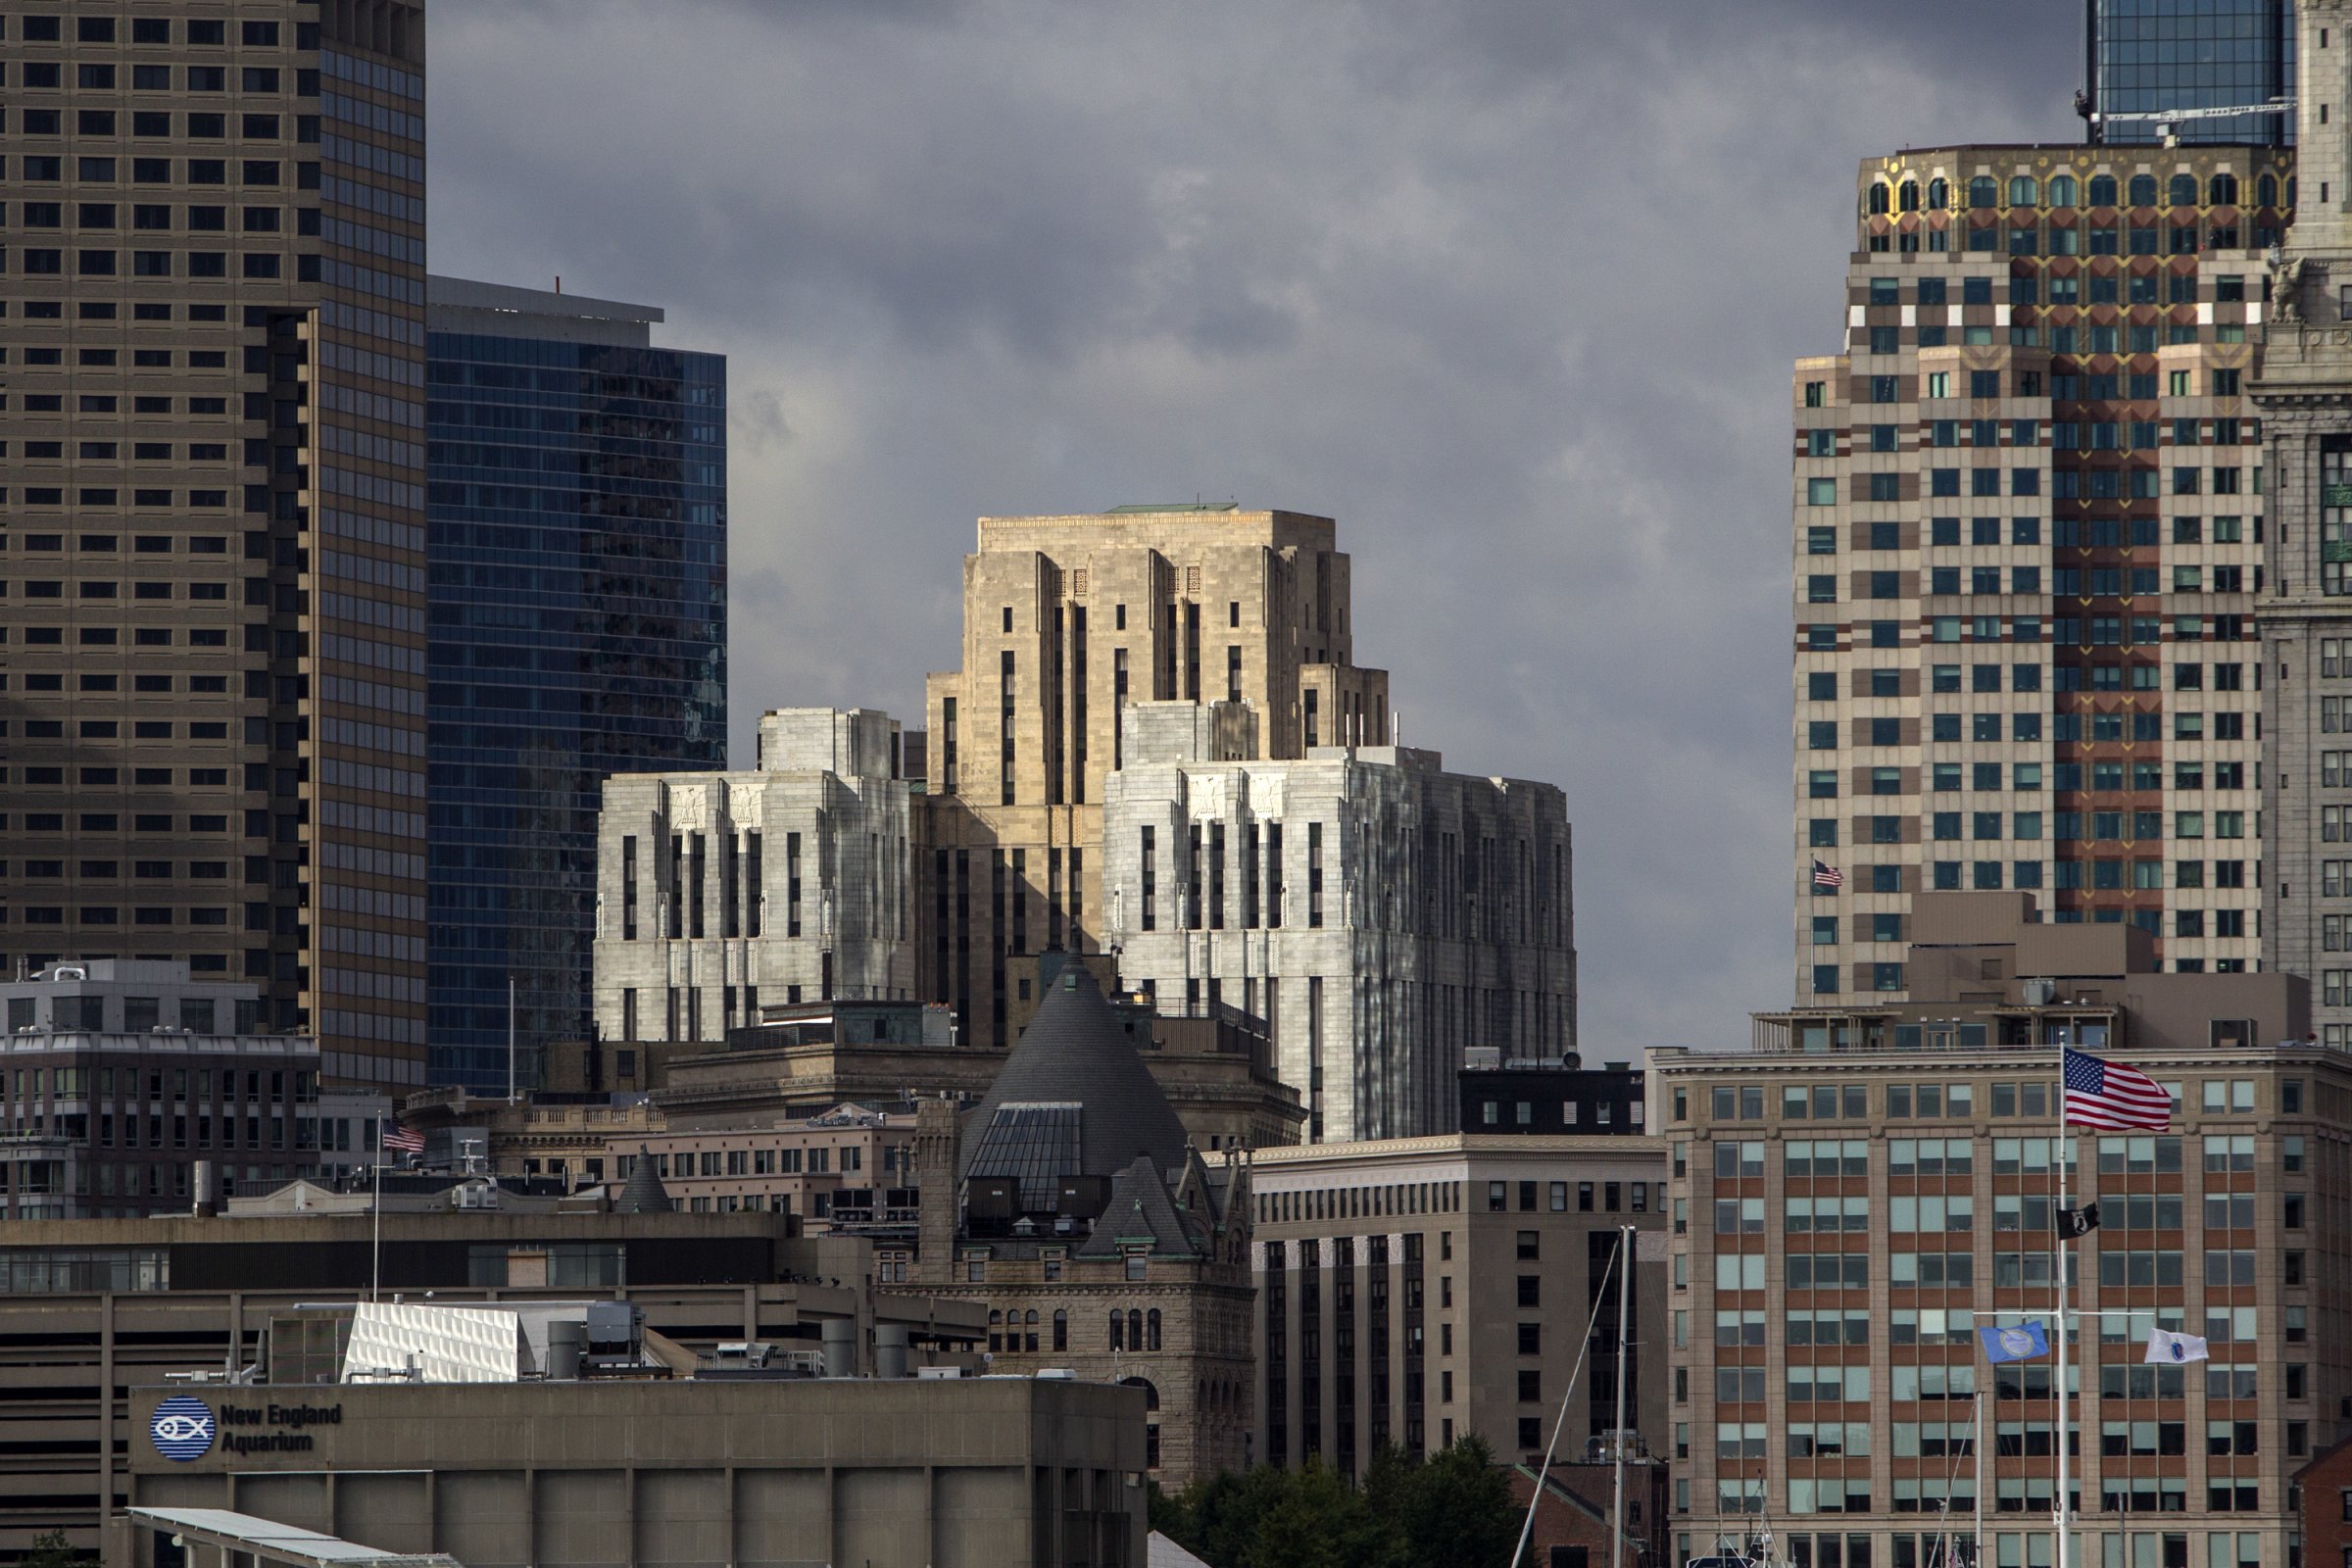 Boston Is Fifth Ranked U.S. City In Value Of Commercial Real Estate Transactions